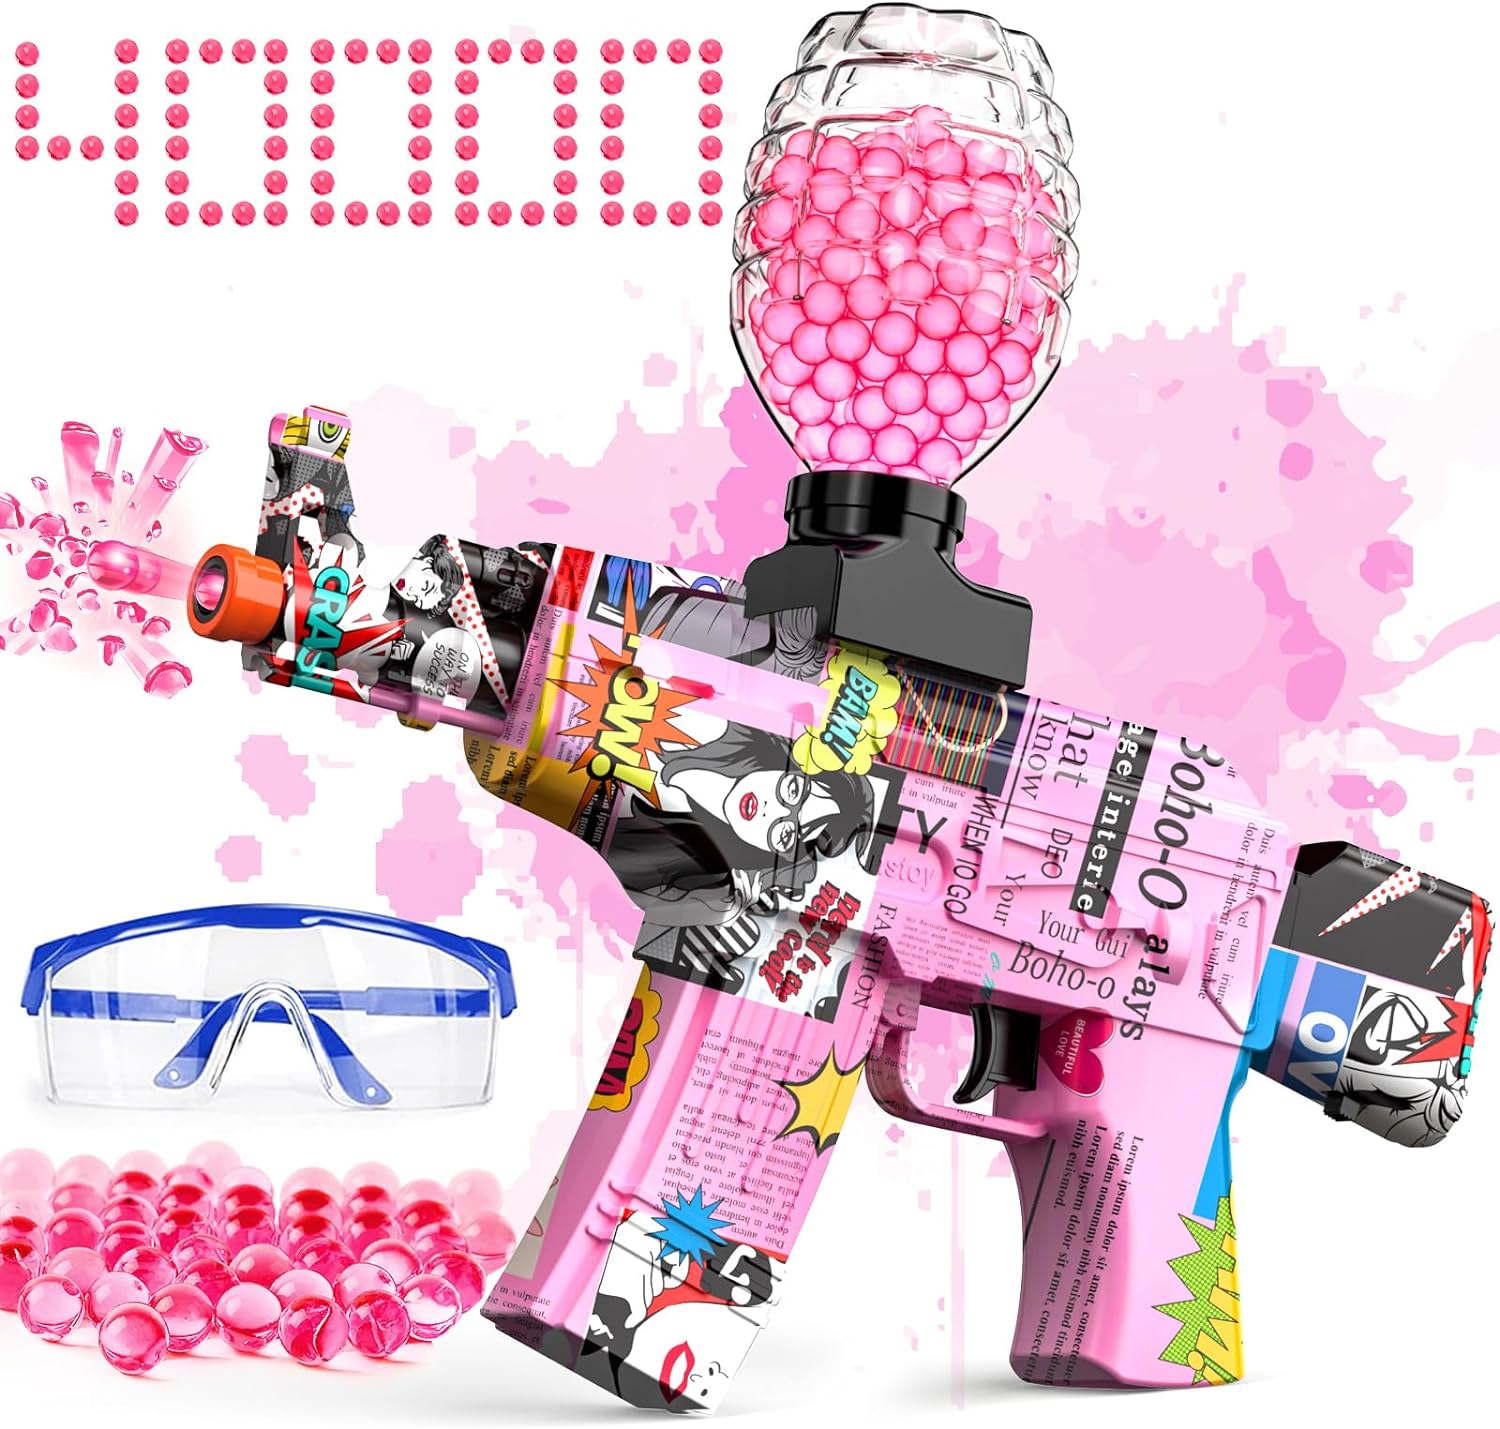 Pink Orbeez gun with 4000 water beads and other accessories